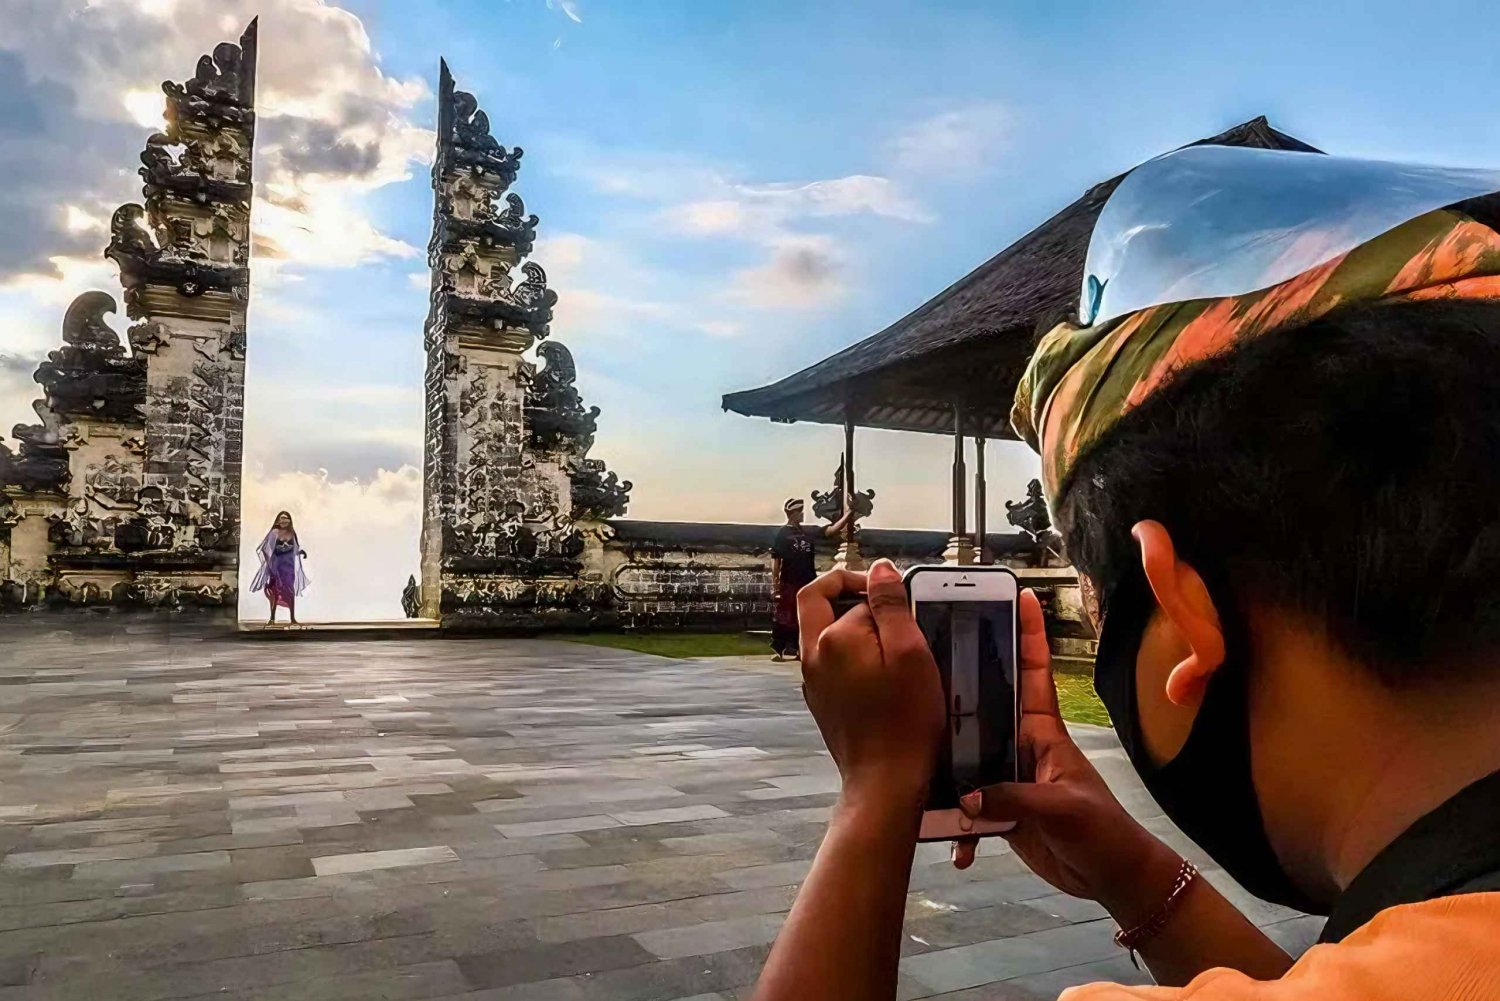 Bali: Full-Day Guided Tour of Heaven Gate Temple